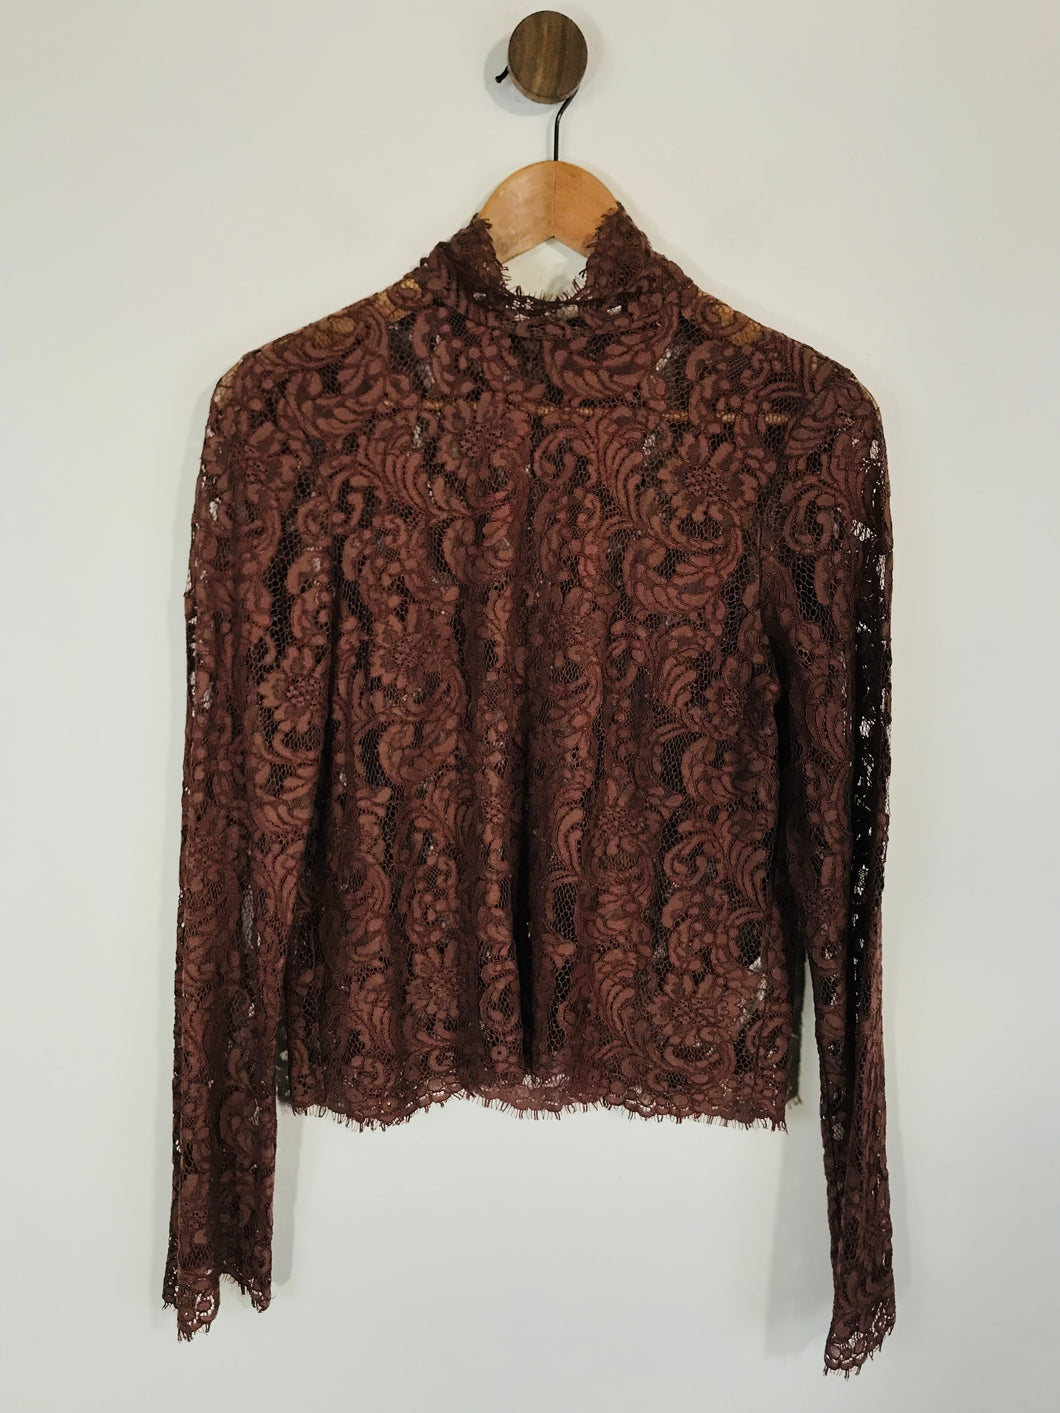 Wilfred Women's High Neck Lace Blouse | M UK10-12 | Brown